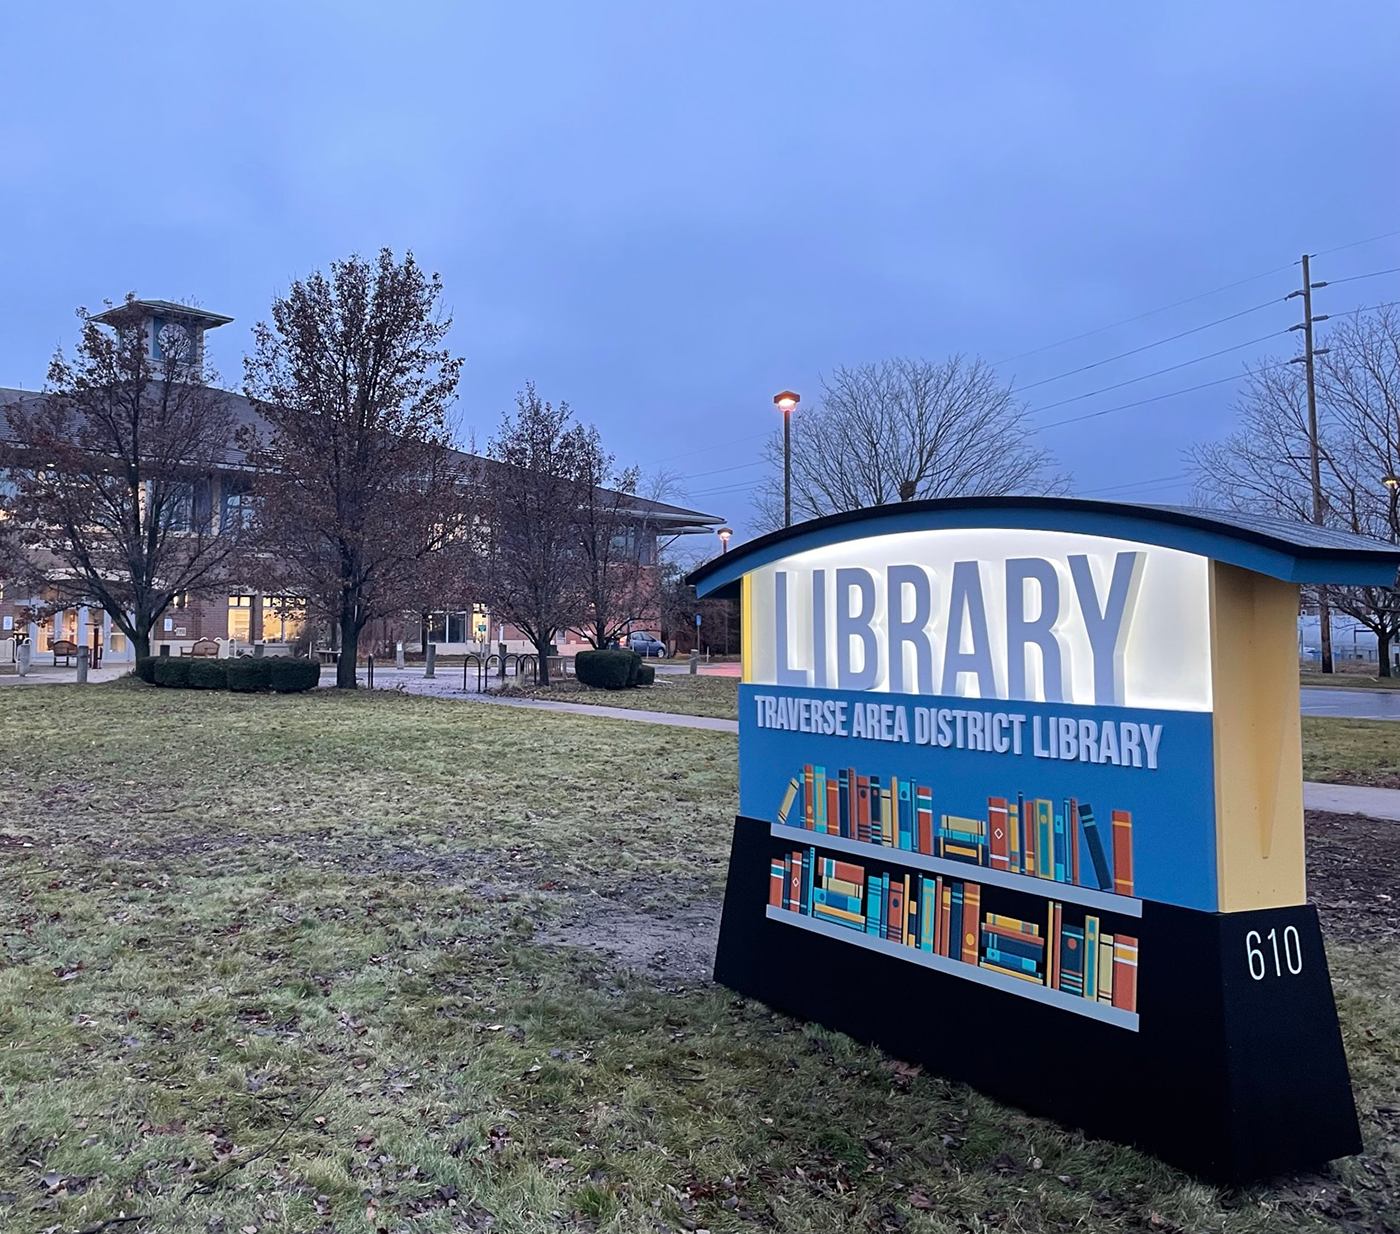 Sign outside the Main Library, Library is illuminated, over two bookshelves with the words Traverse Area District Library